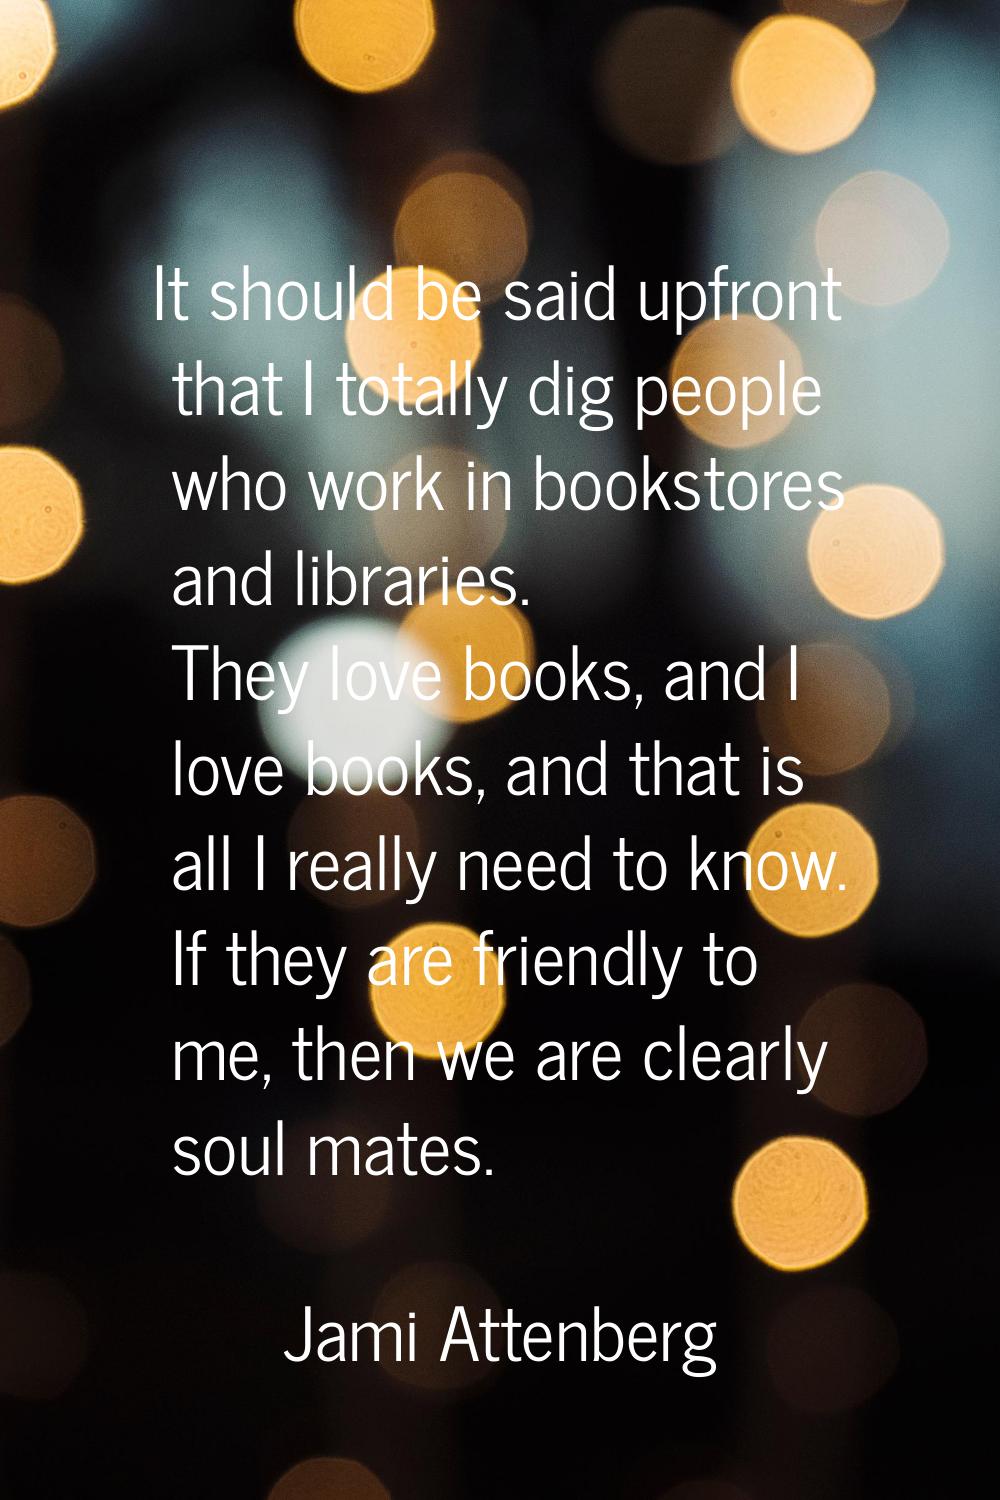 It should be said upfront that I totally dig people who work in bookstores and libraries. They love